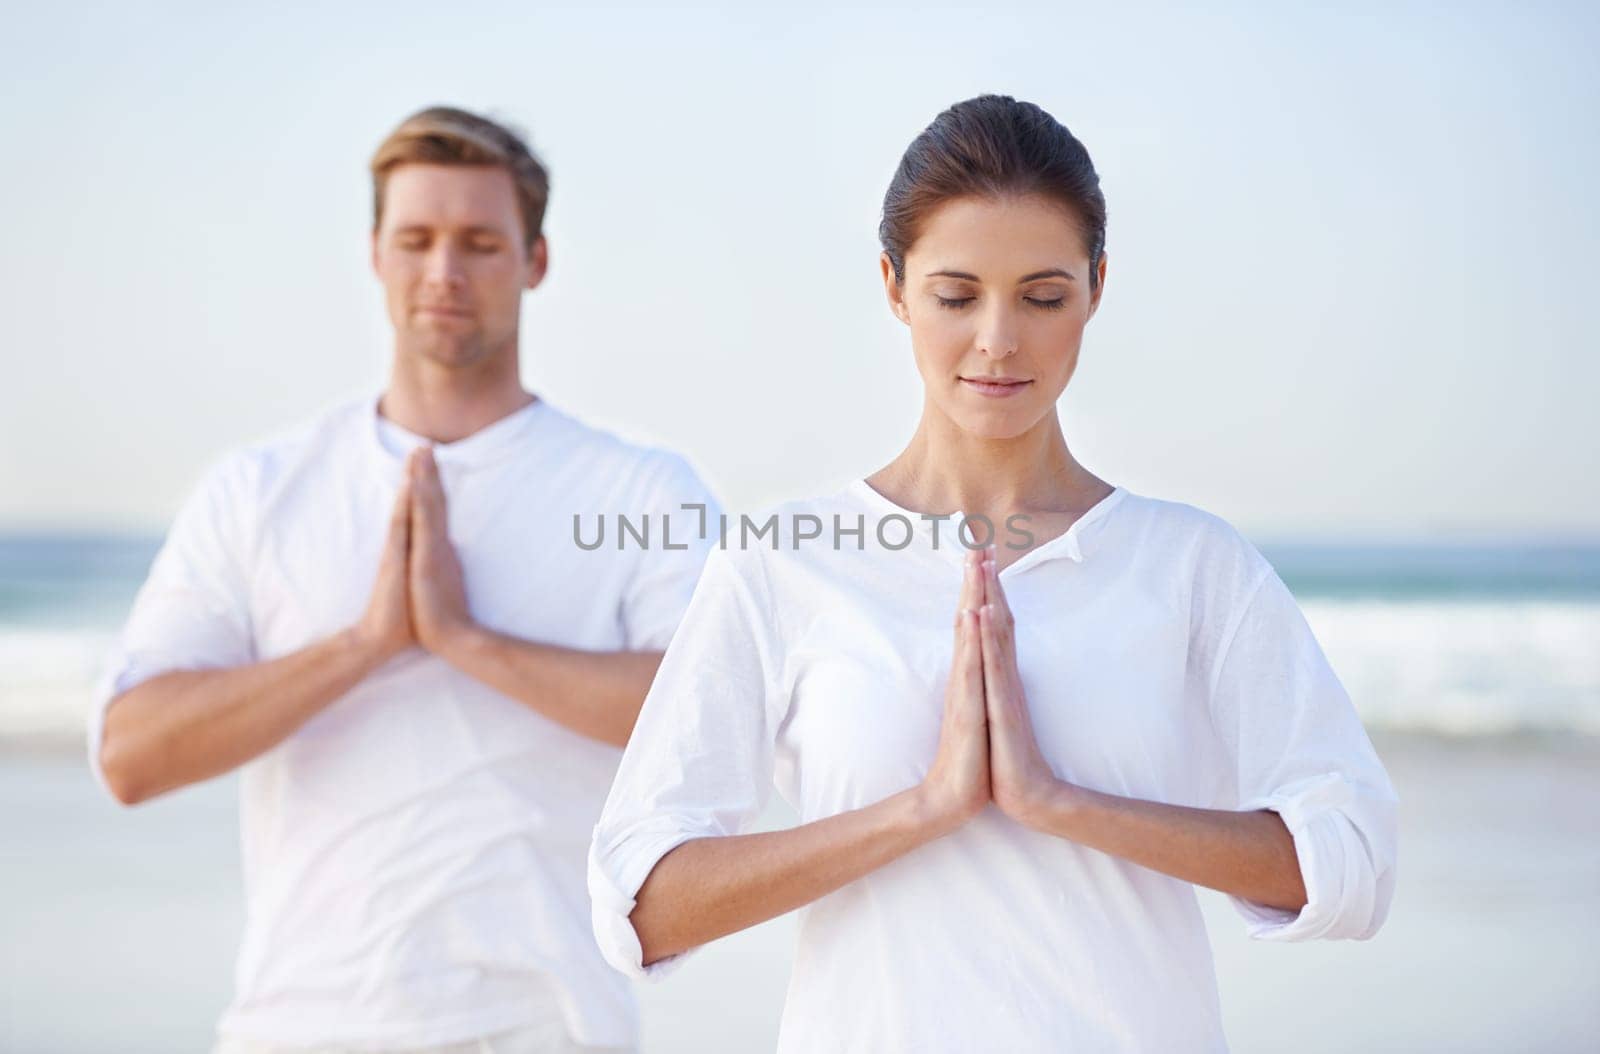 Couple, yoga and meditation on beach, prayer for zen and wellness, travel and mindfulness with holistic healing. People outdoor, exercise and peace, workout together for bonding with sea and nature.